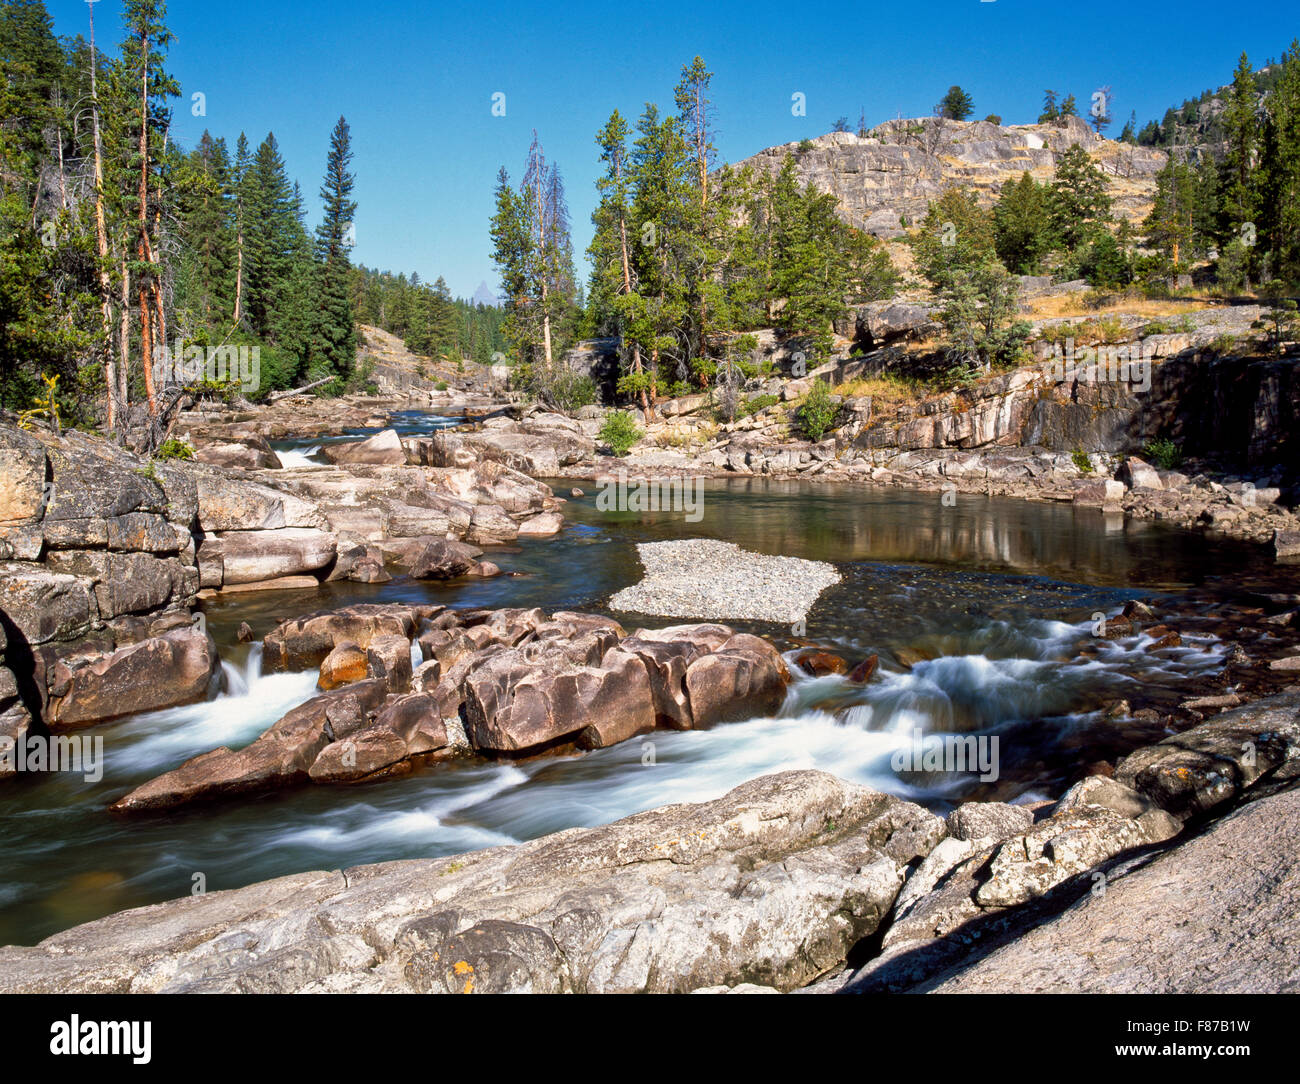 clarks fork yellowstone river in shoshone national forest, wyoming Stock Photo